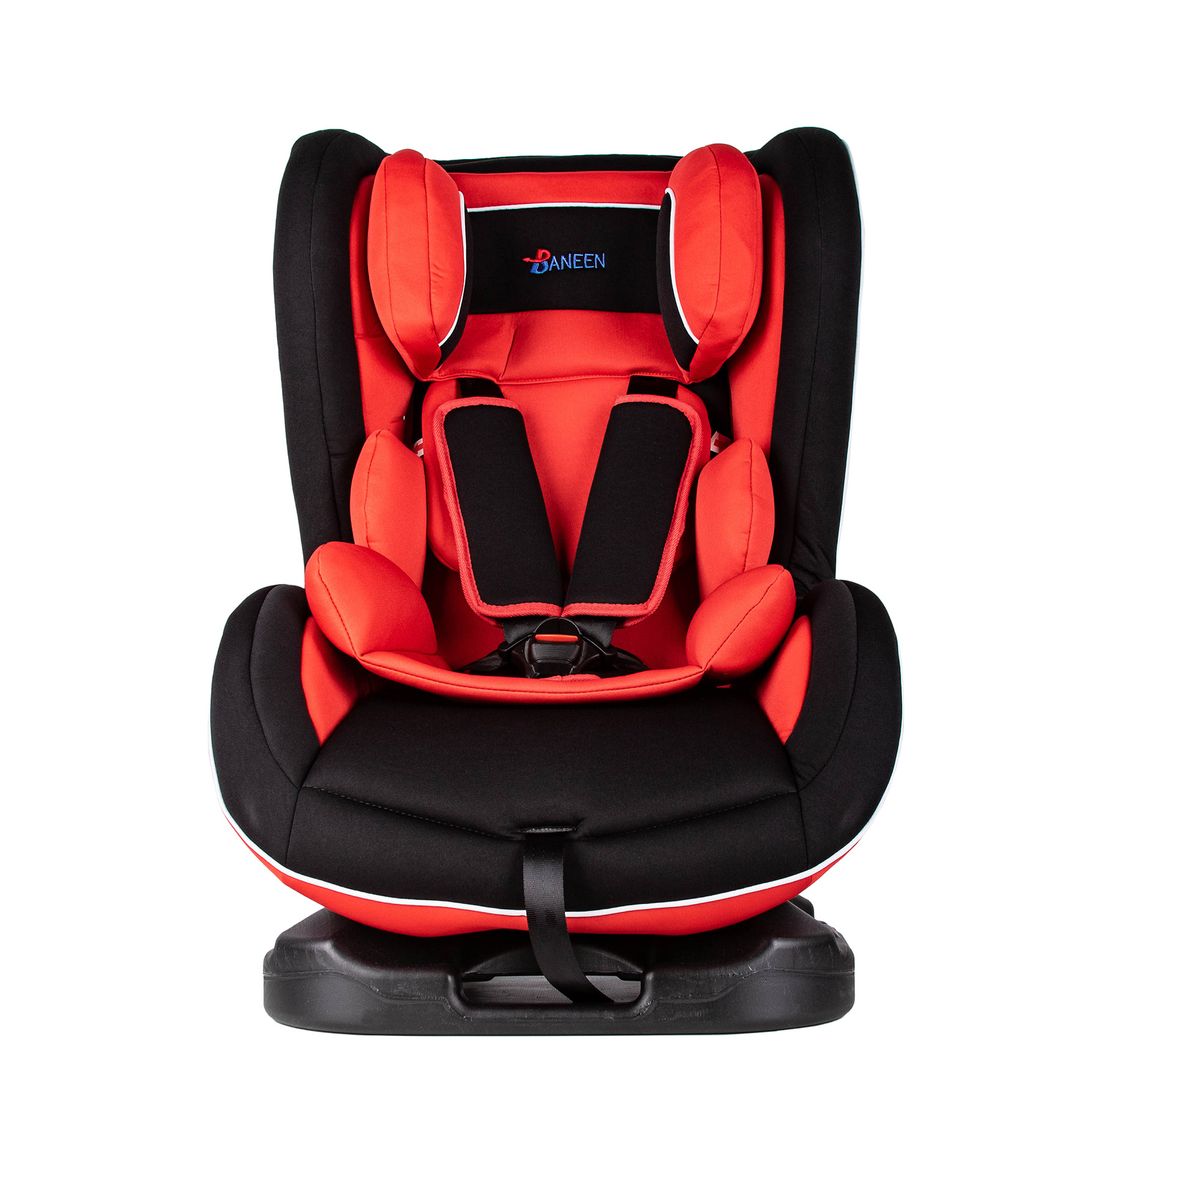 Baneen Baby Safety Car Seat Carrier (0-18KG / 0-4 years) - Black & Red ...